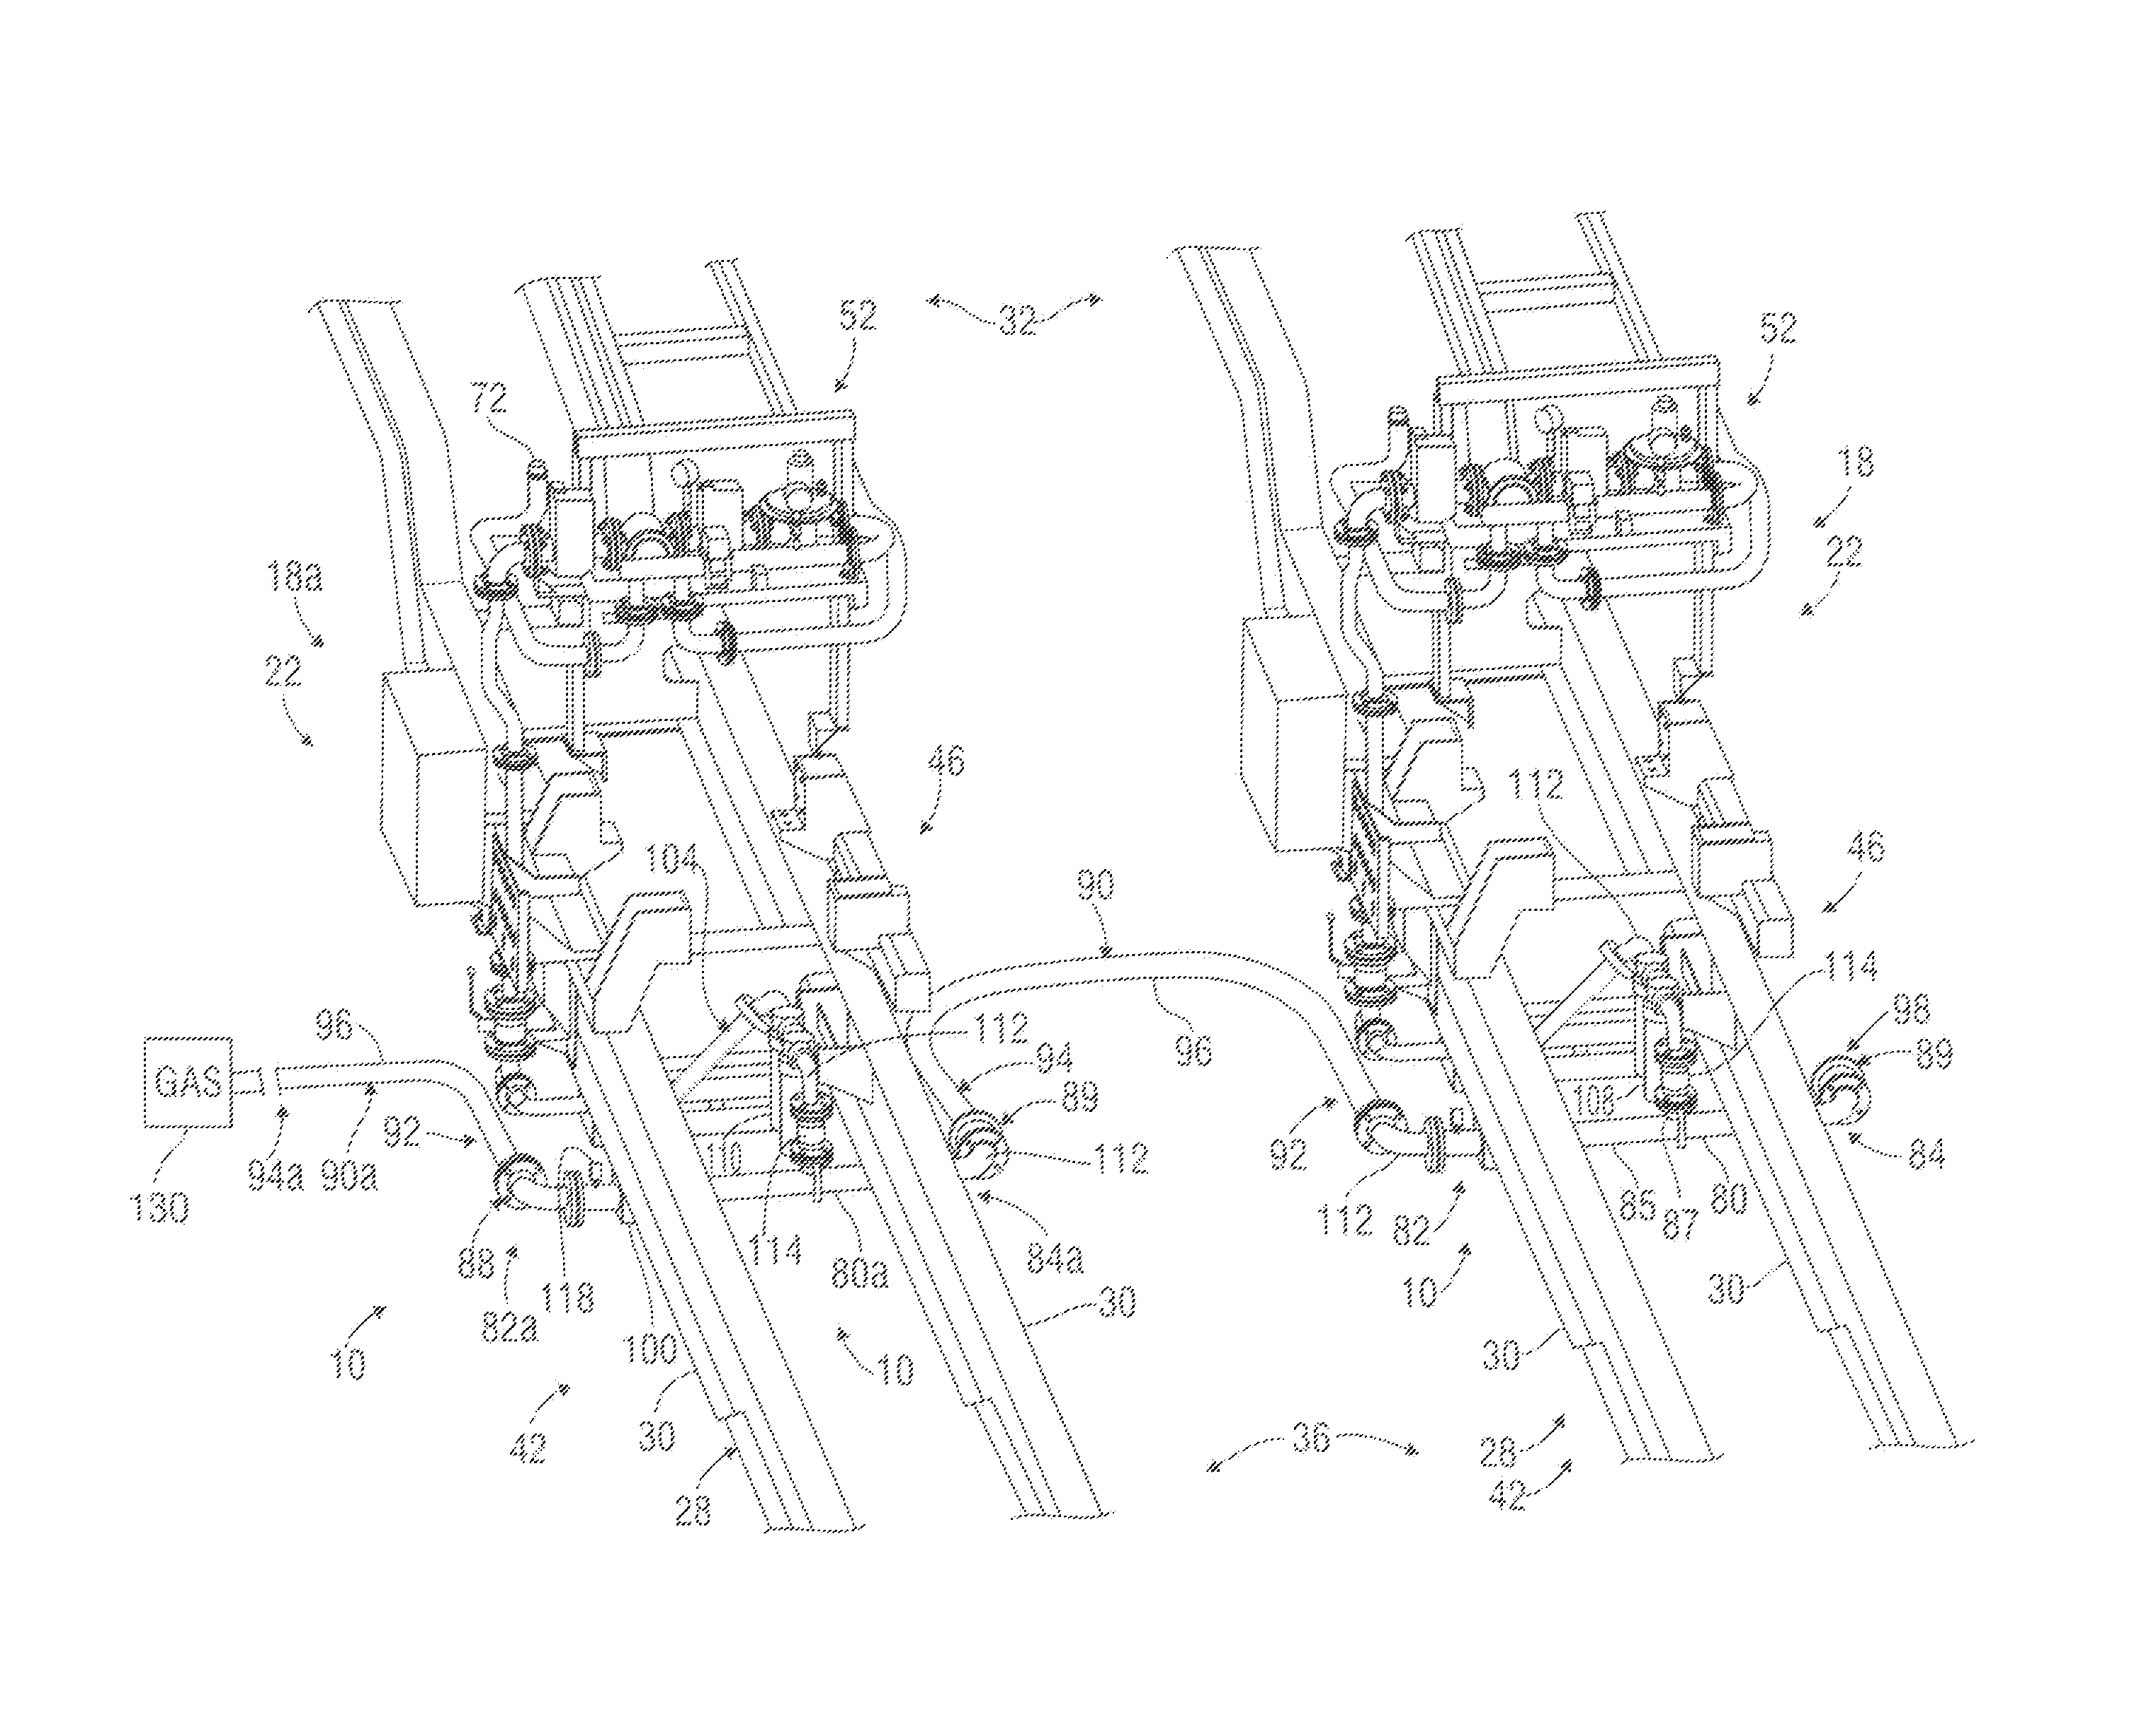 Apparatus and methods for providing natural gas to multiple engines disposed upon multiple carriers